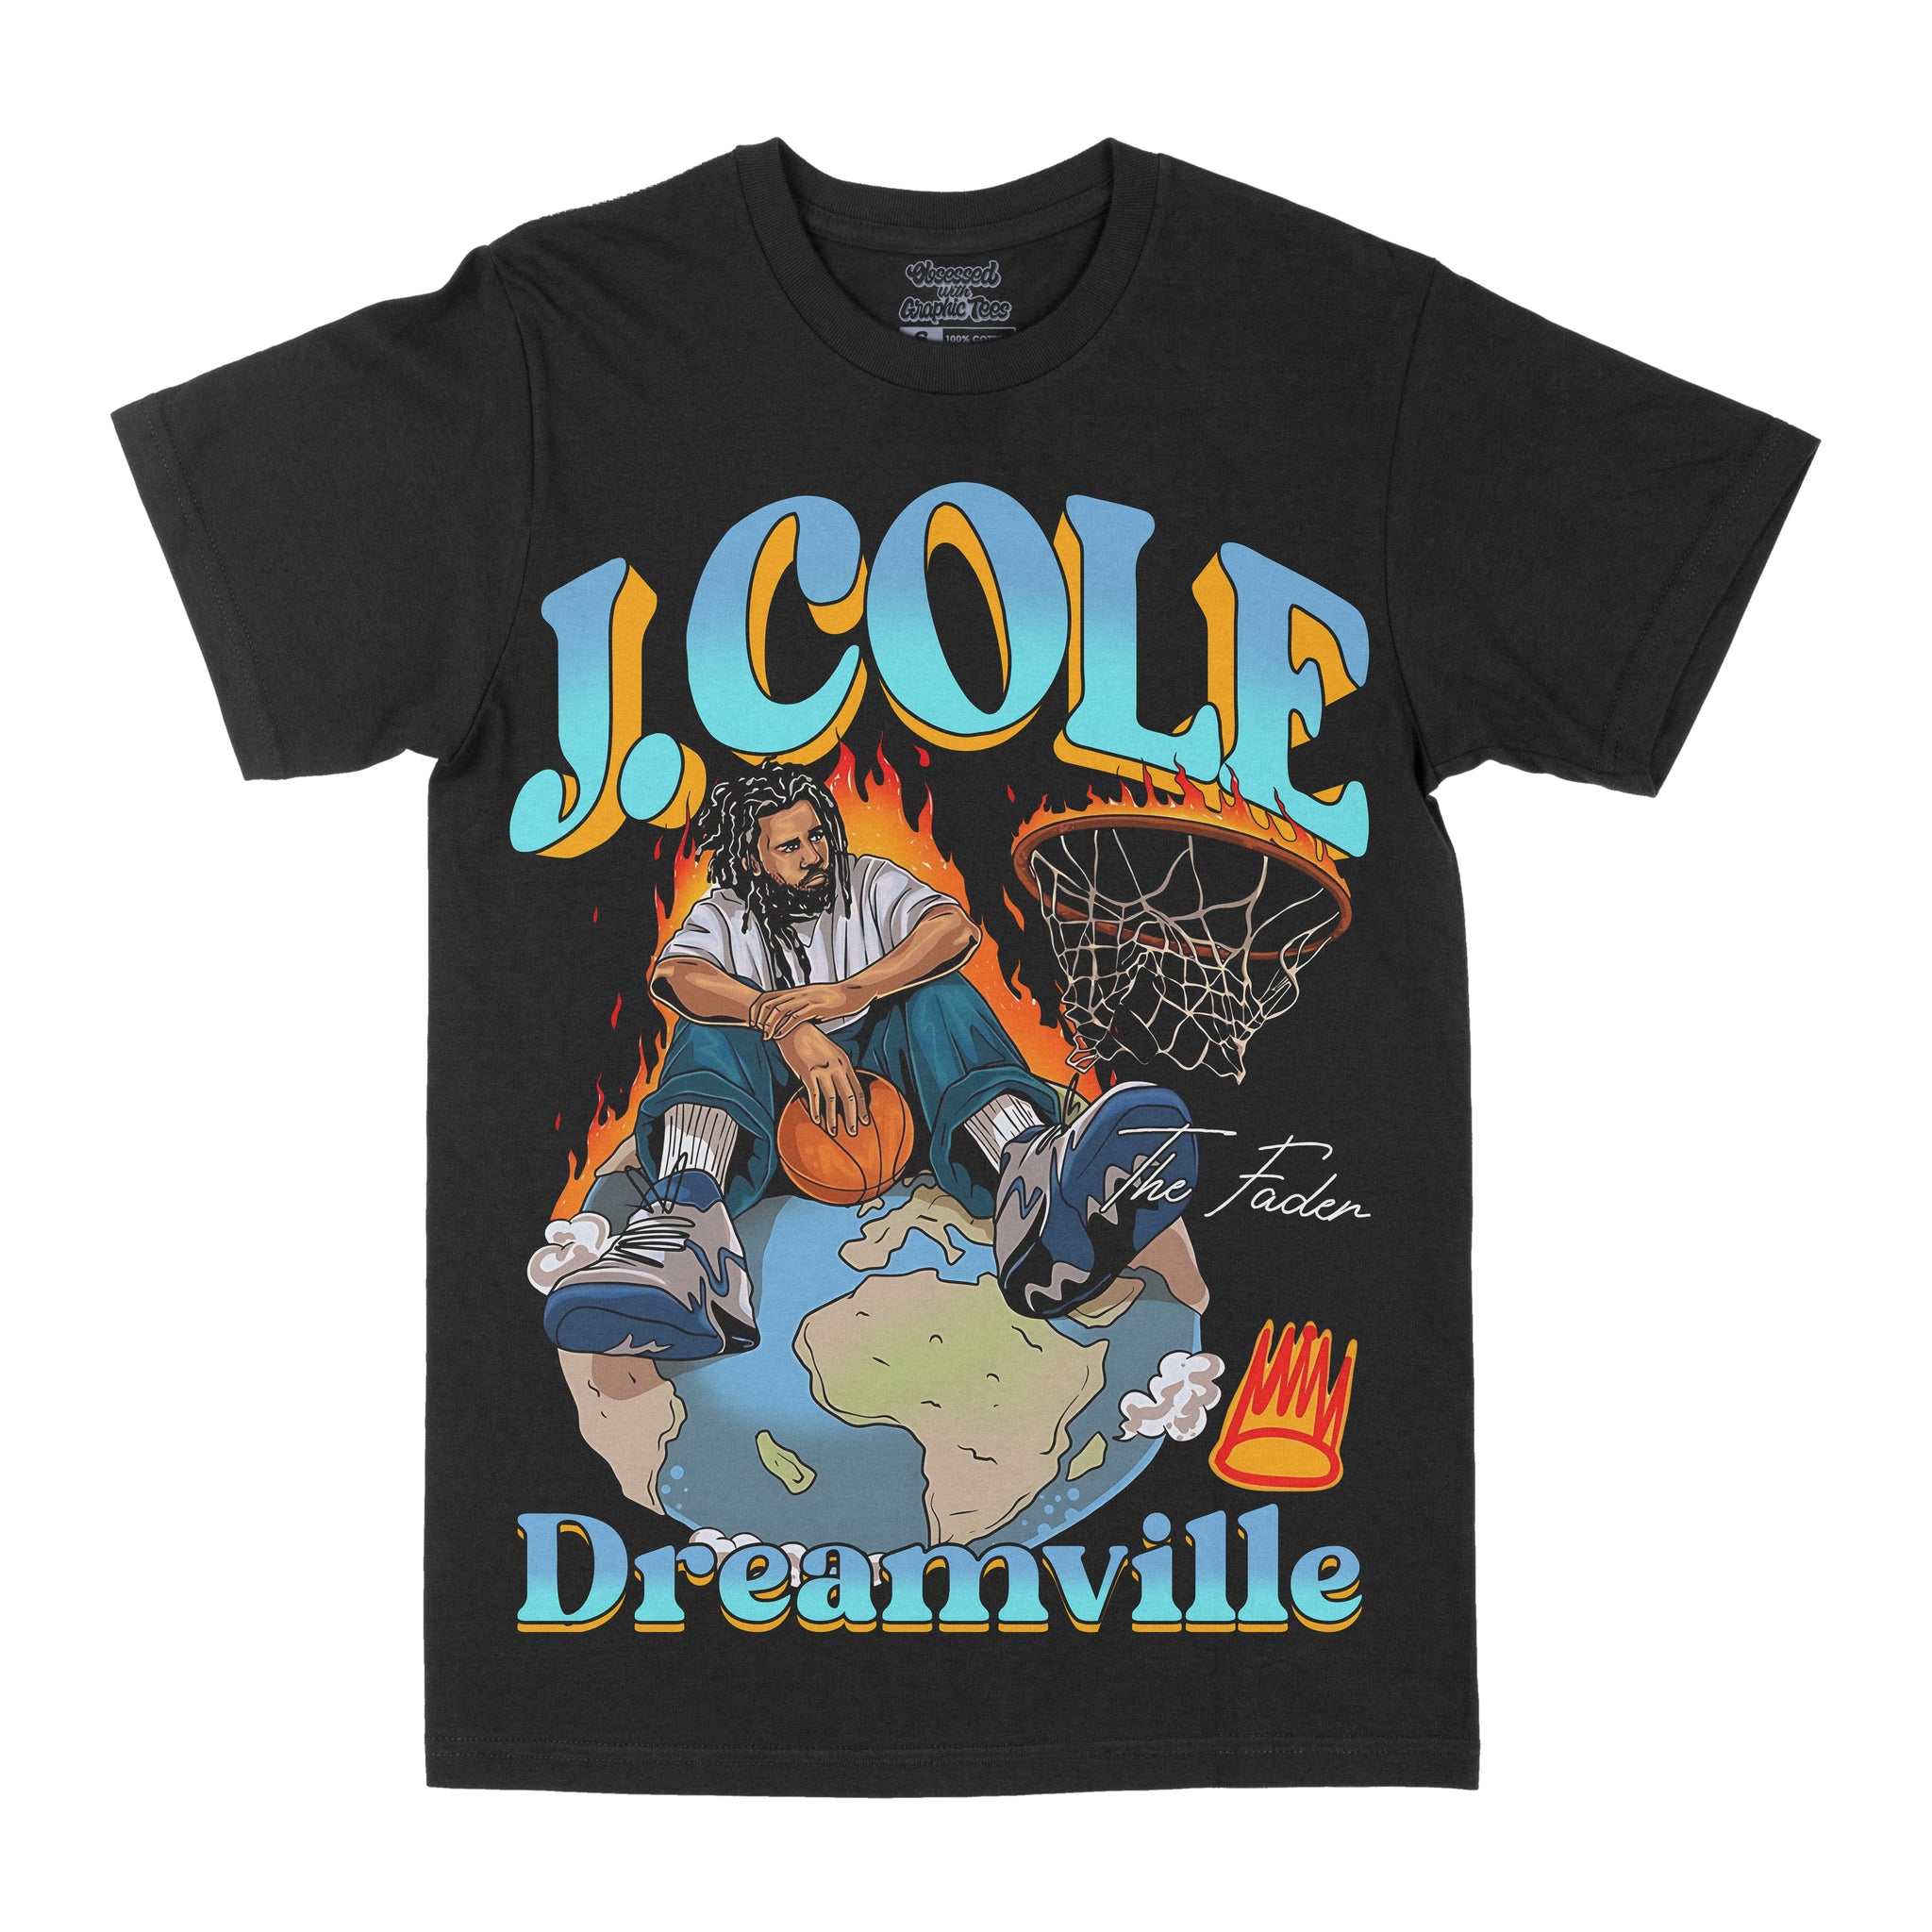 J. Cole "Dreamville World" Graphic Tee